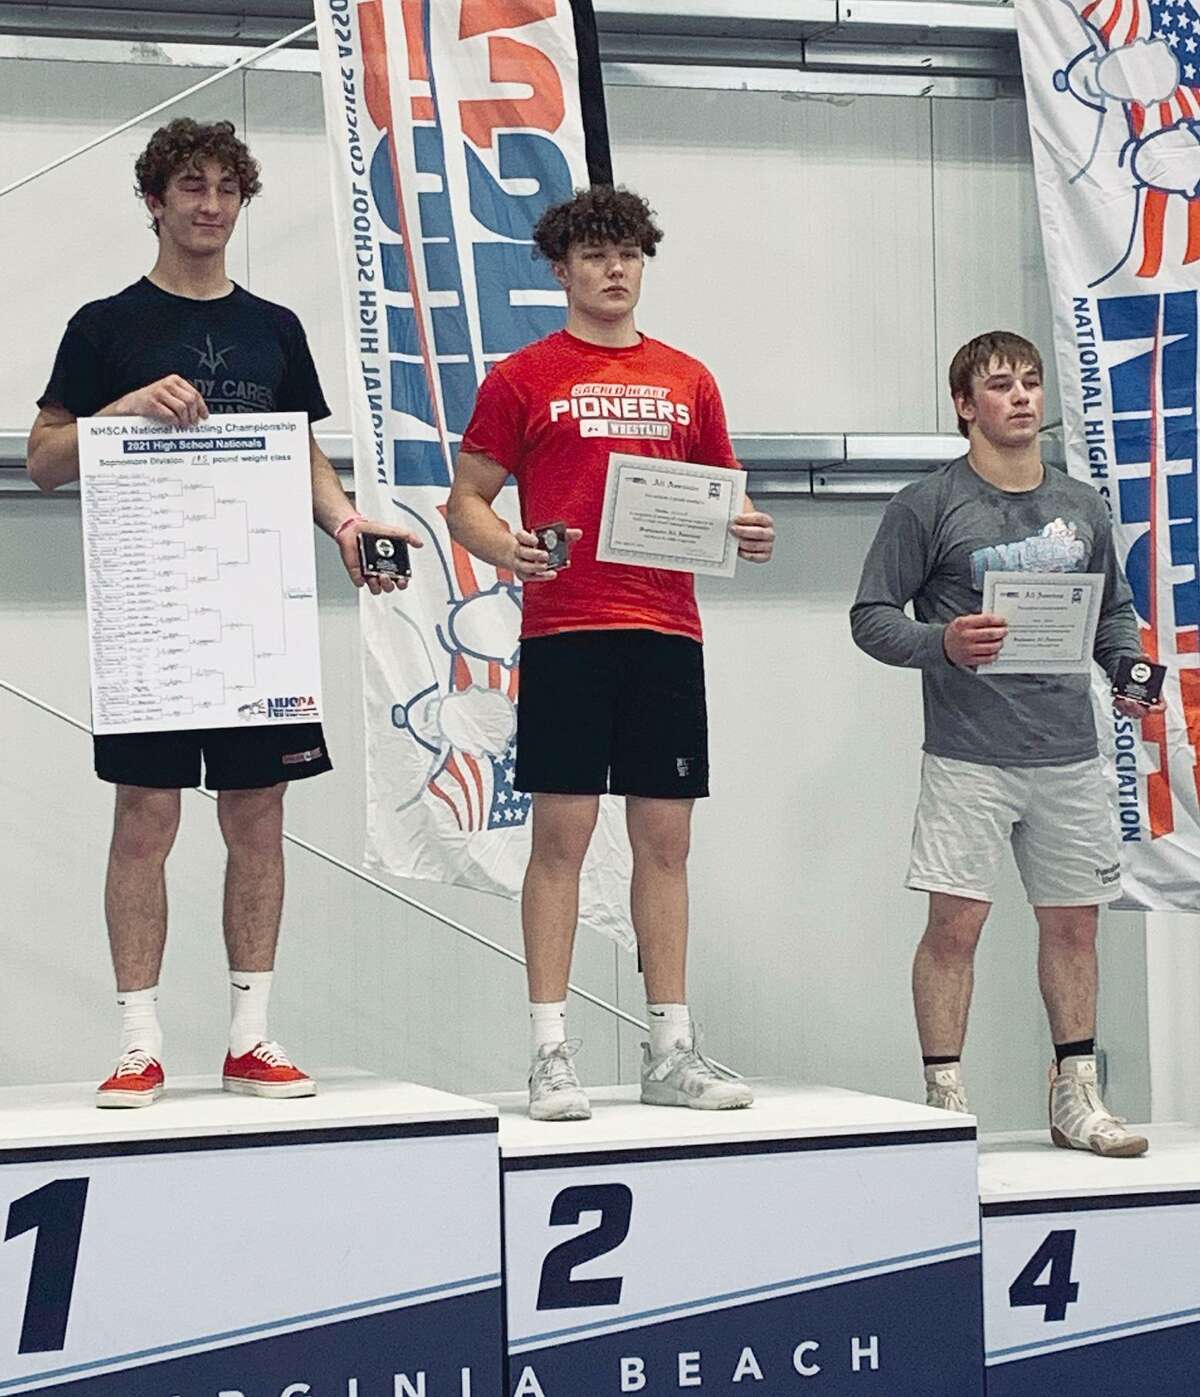 Norwalk's Brendan Gilchrist (center) stands on the podium after his runner-up finish in the sophomore 195-pound weight class at the National High School Coaches Association wrestling tournament in Virginia Beach, Va., on April 25, 2021. Sonny Sasso (PA) was first and Jacob Scheib (PA) was fourth.